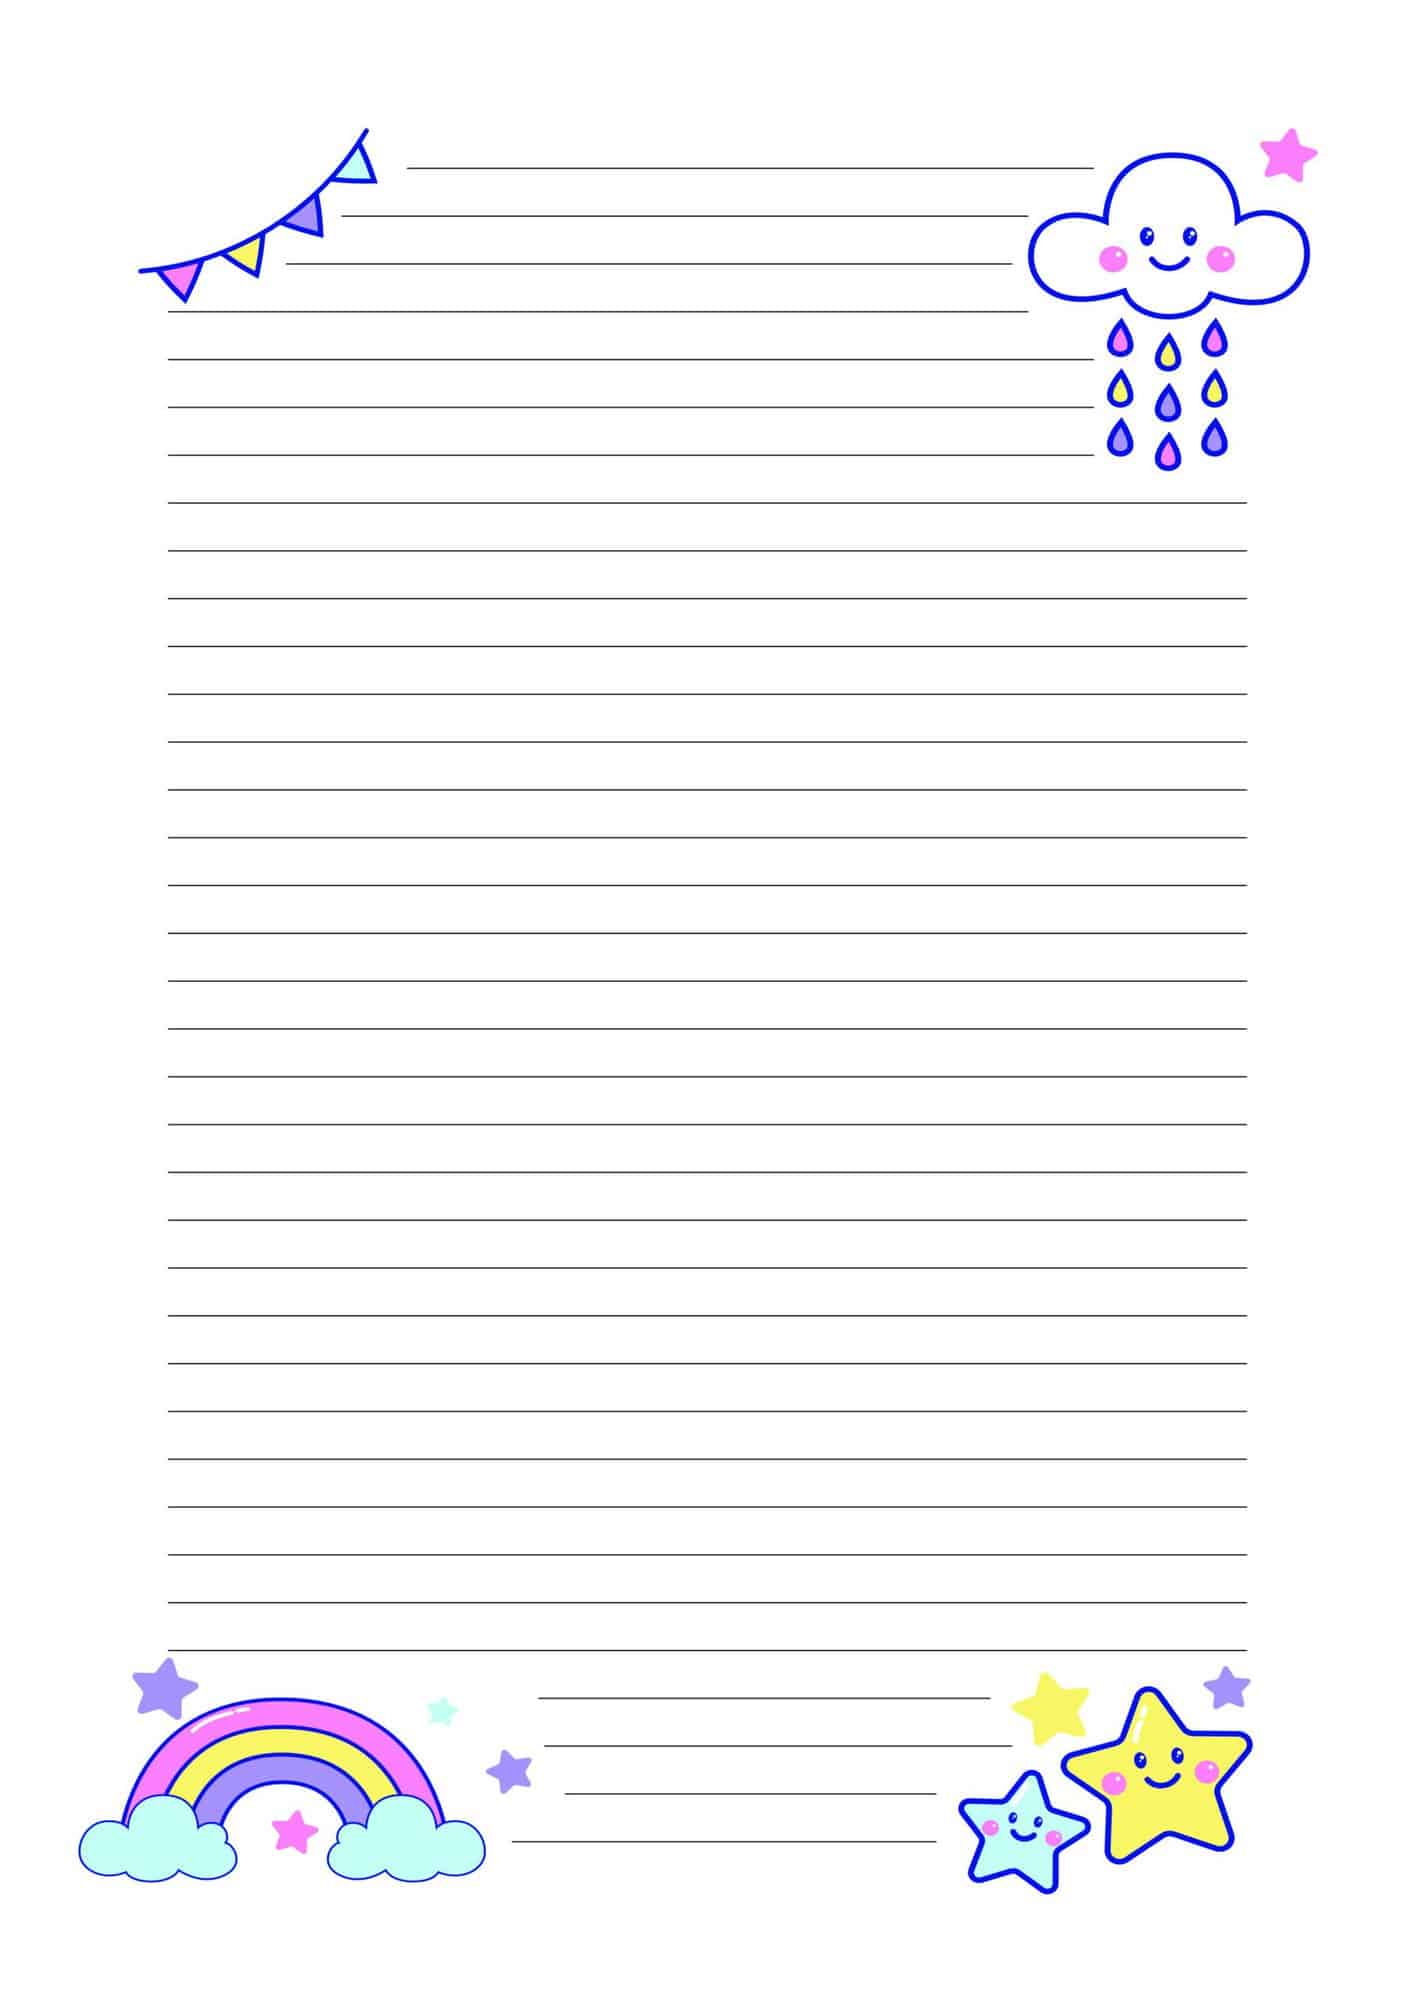 A cute lined paper with rainbows, stars and clouds.